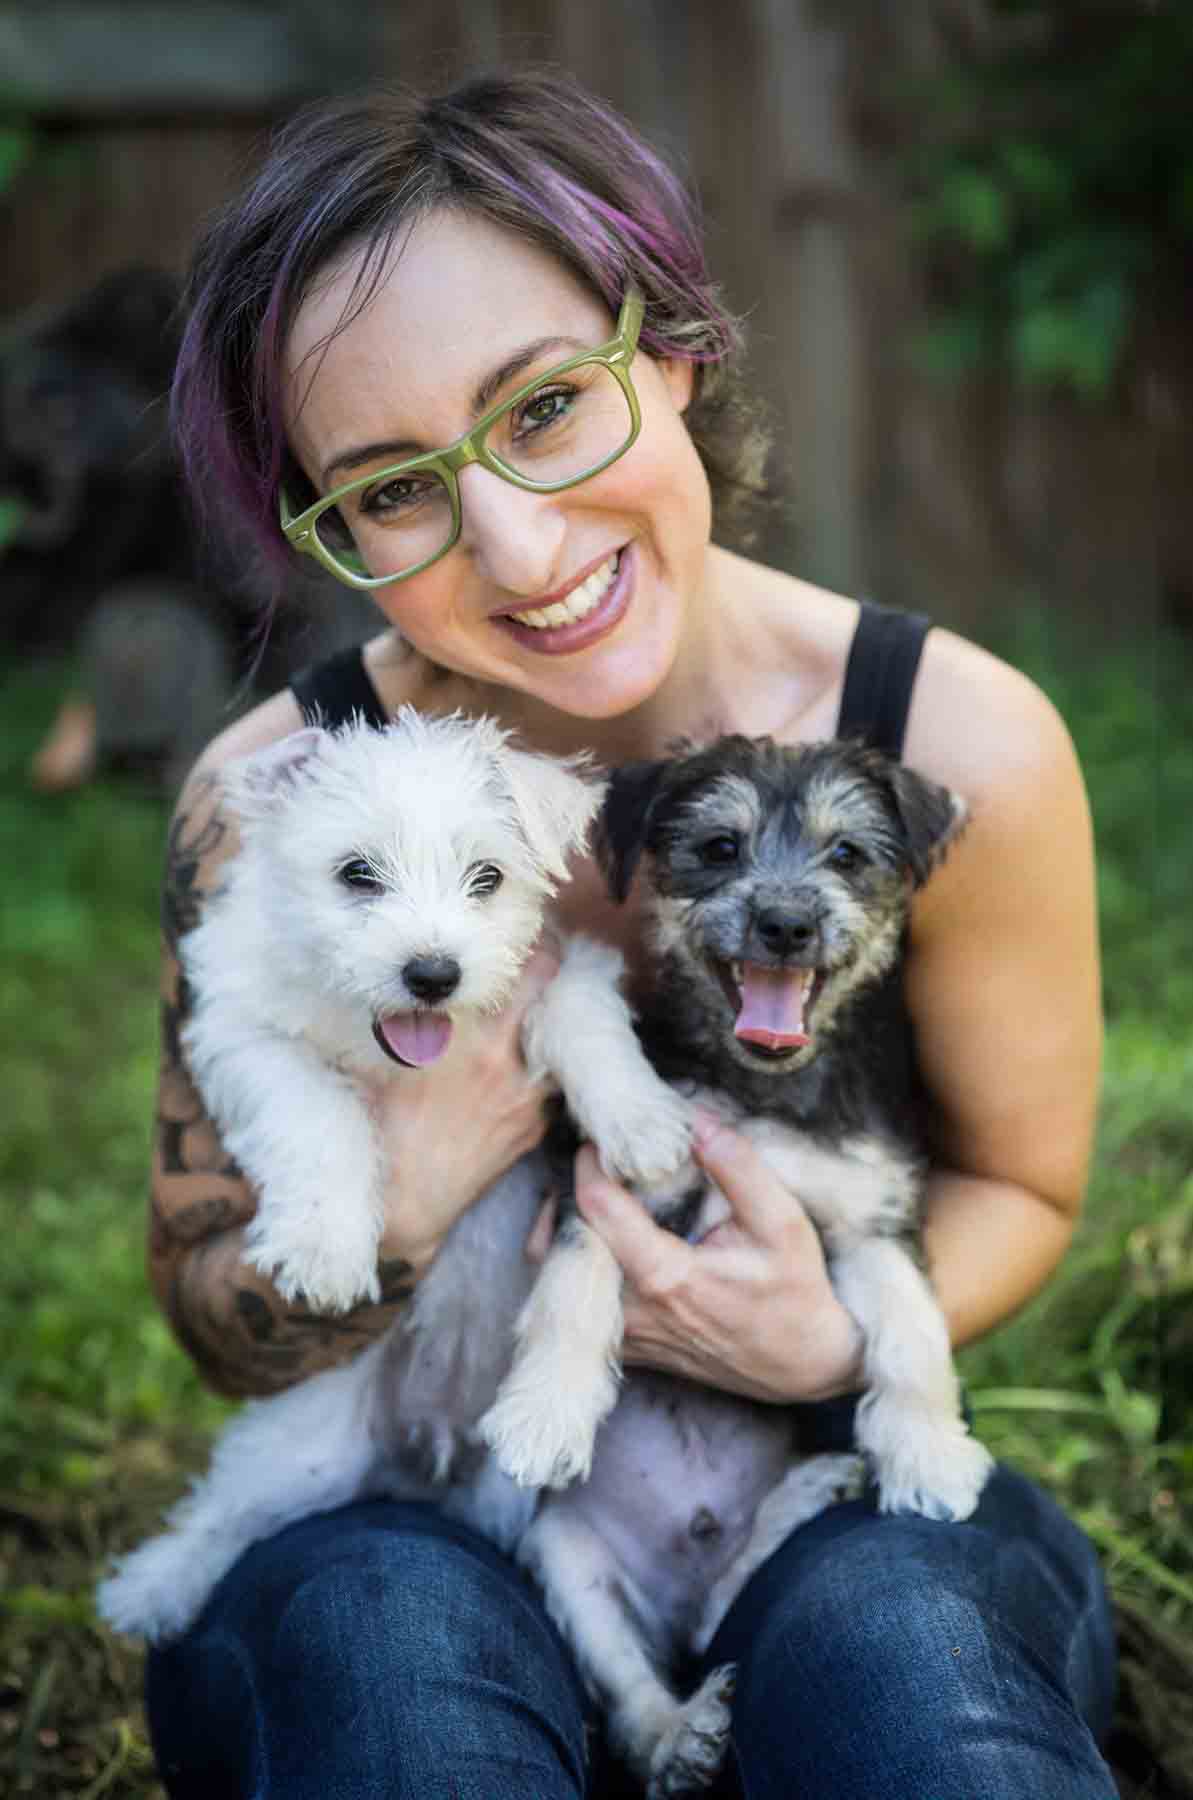 Woman with purple hair and glasses holding two puppies for an article on pet photo tips